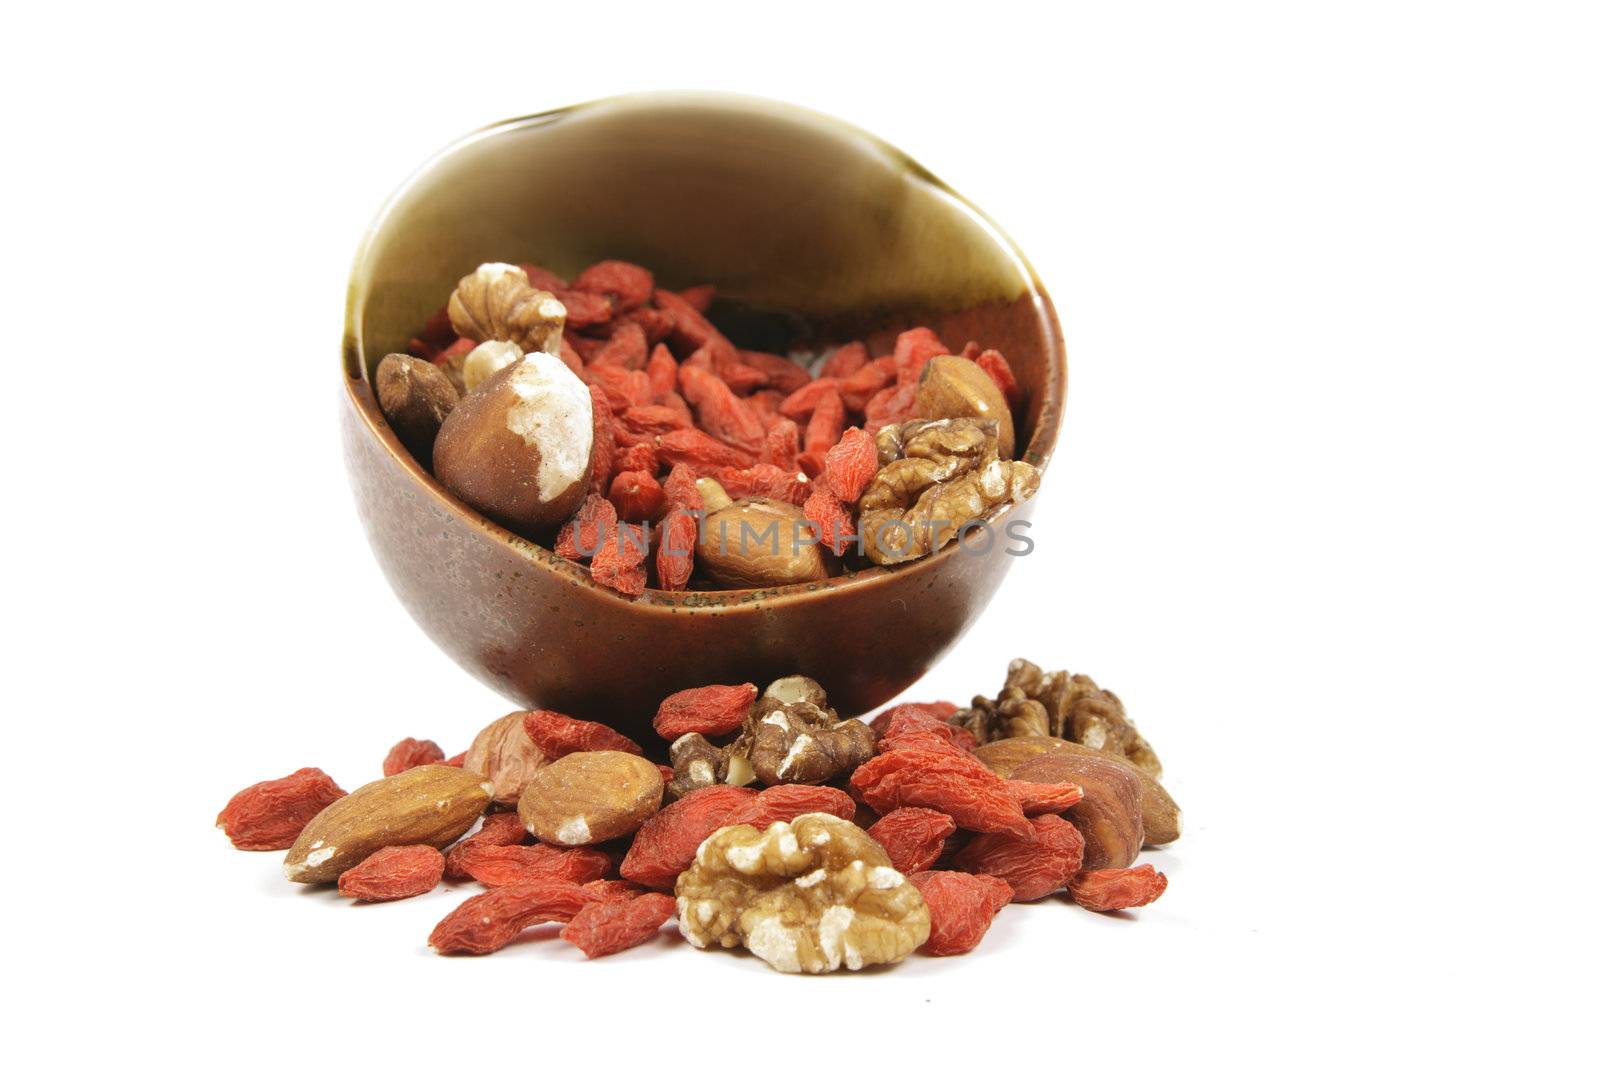 Goji Berries and Nuts in a Bowl by KeithWilson